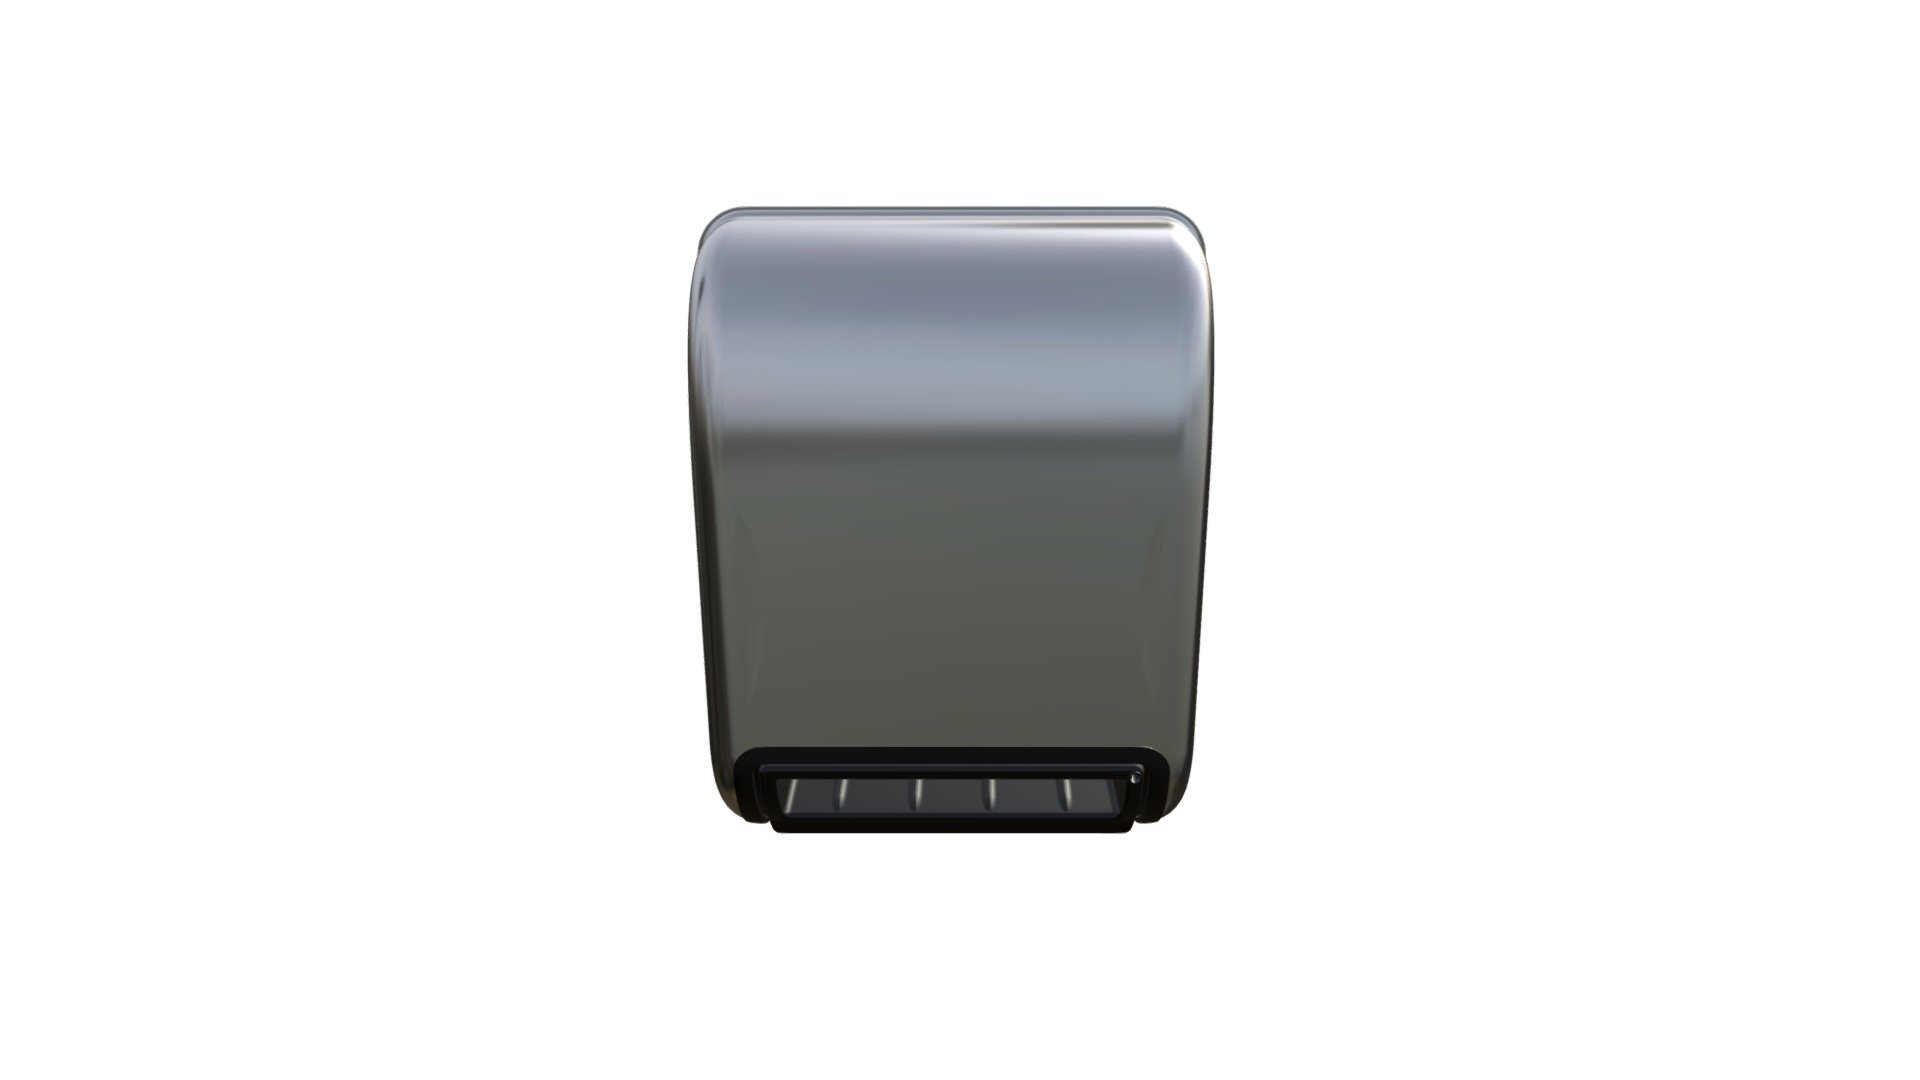 Touchless electronic towel dispensing unit. Designed for installation in existing recessed towel dispensers often found in commercial buildings of all types. This easy to install dispenser adds towel capacity while reducing maintenance and refilling time 3d model